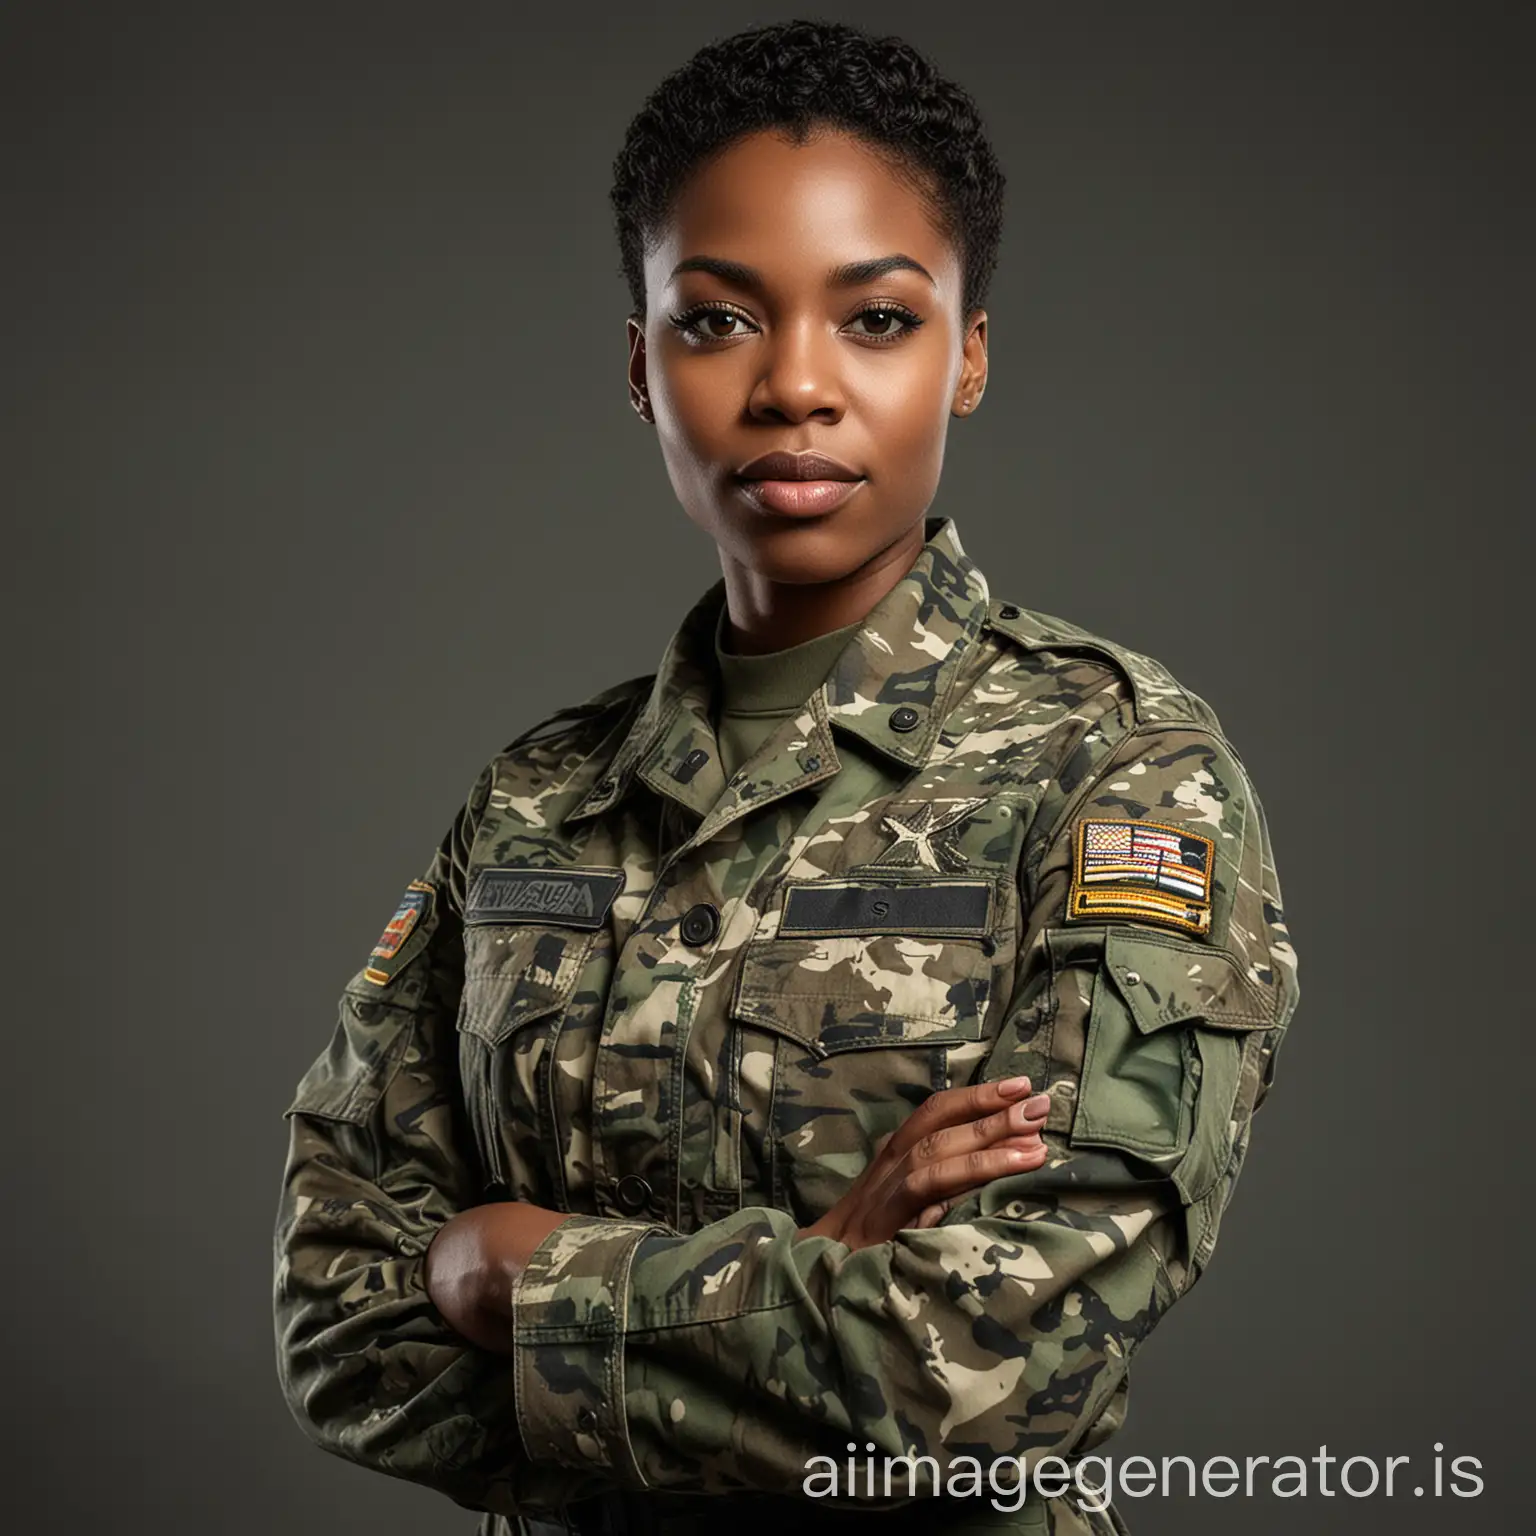 African-American-Woman-in-Military-Camouflage-Uniform